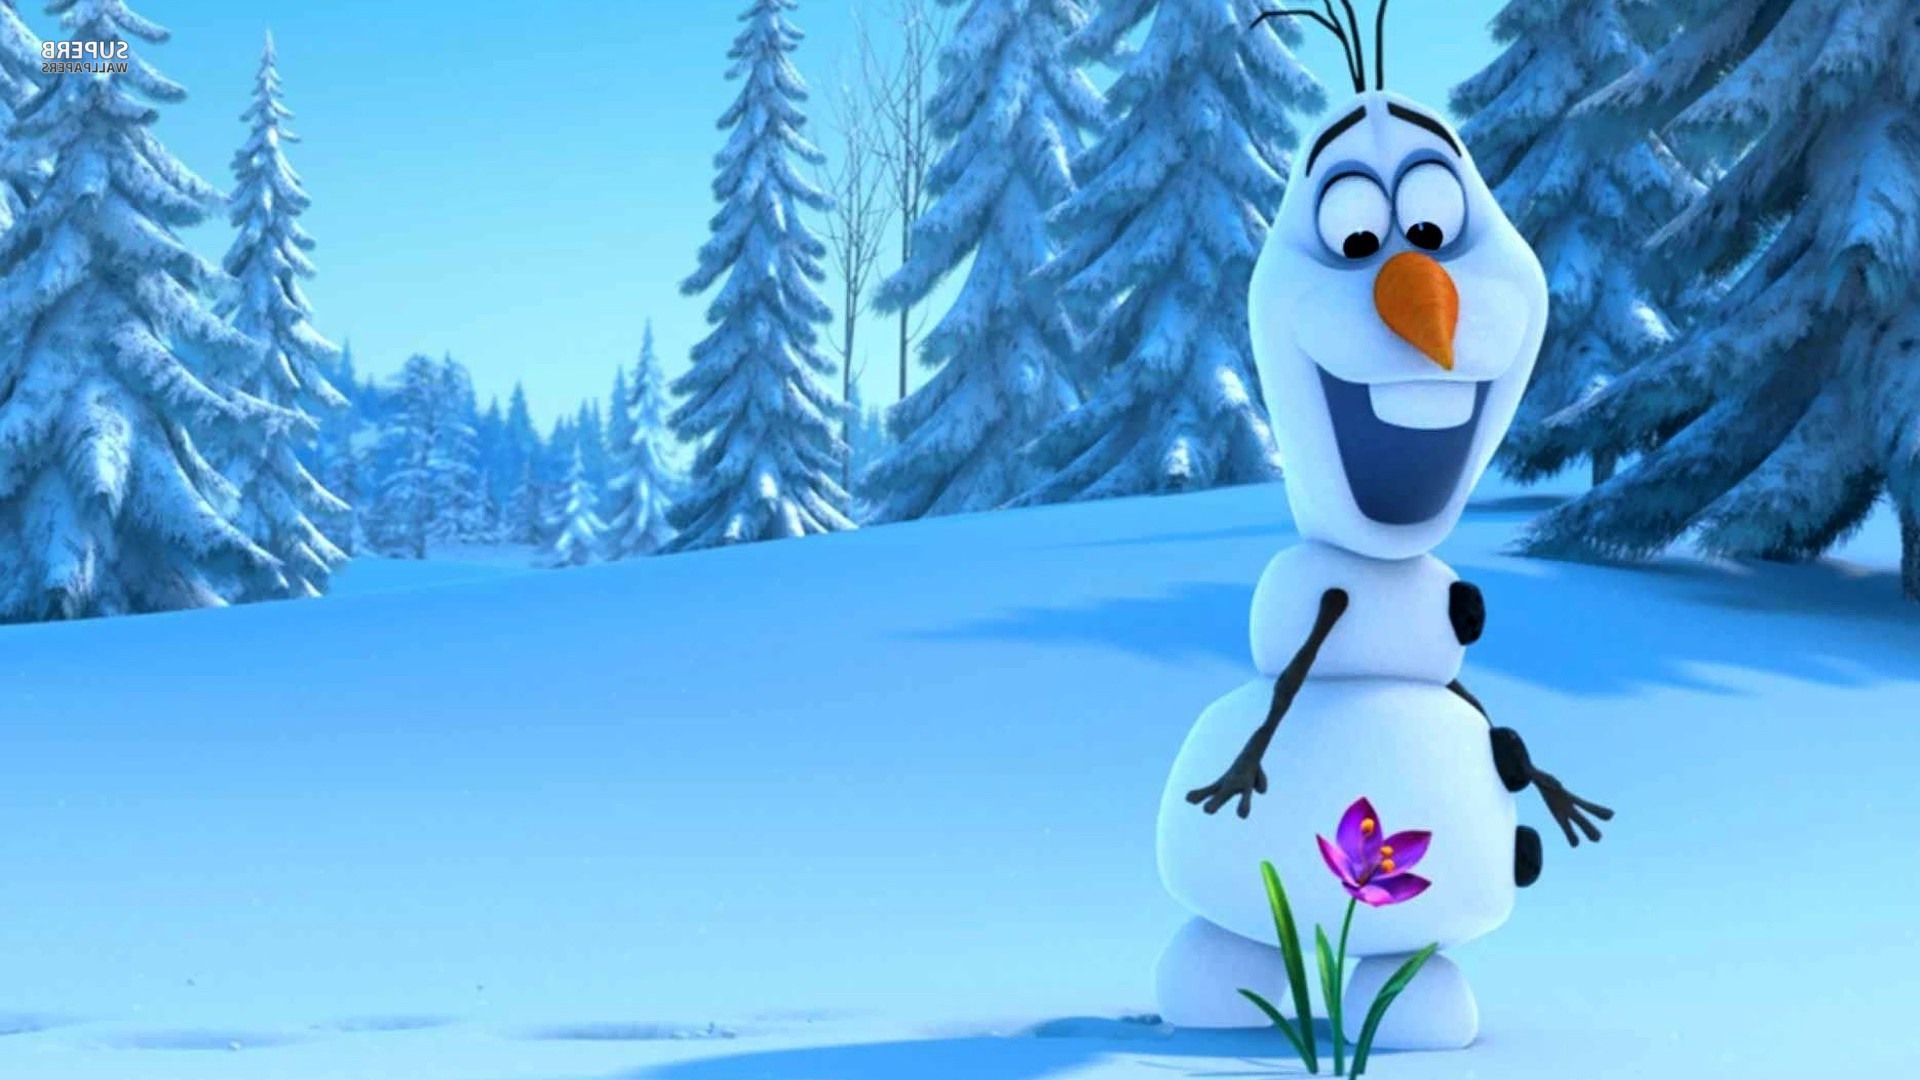 Olaf Frozen HD Wallpaper Image Pictures